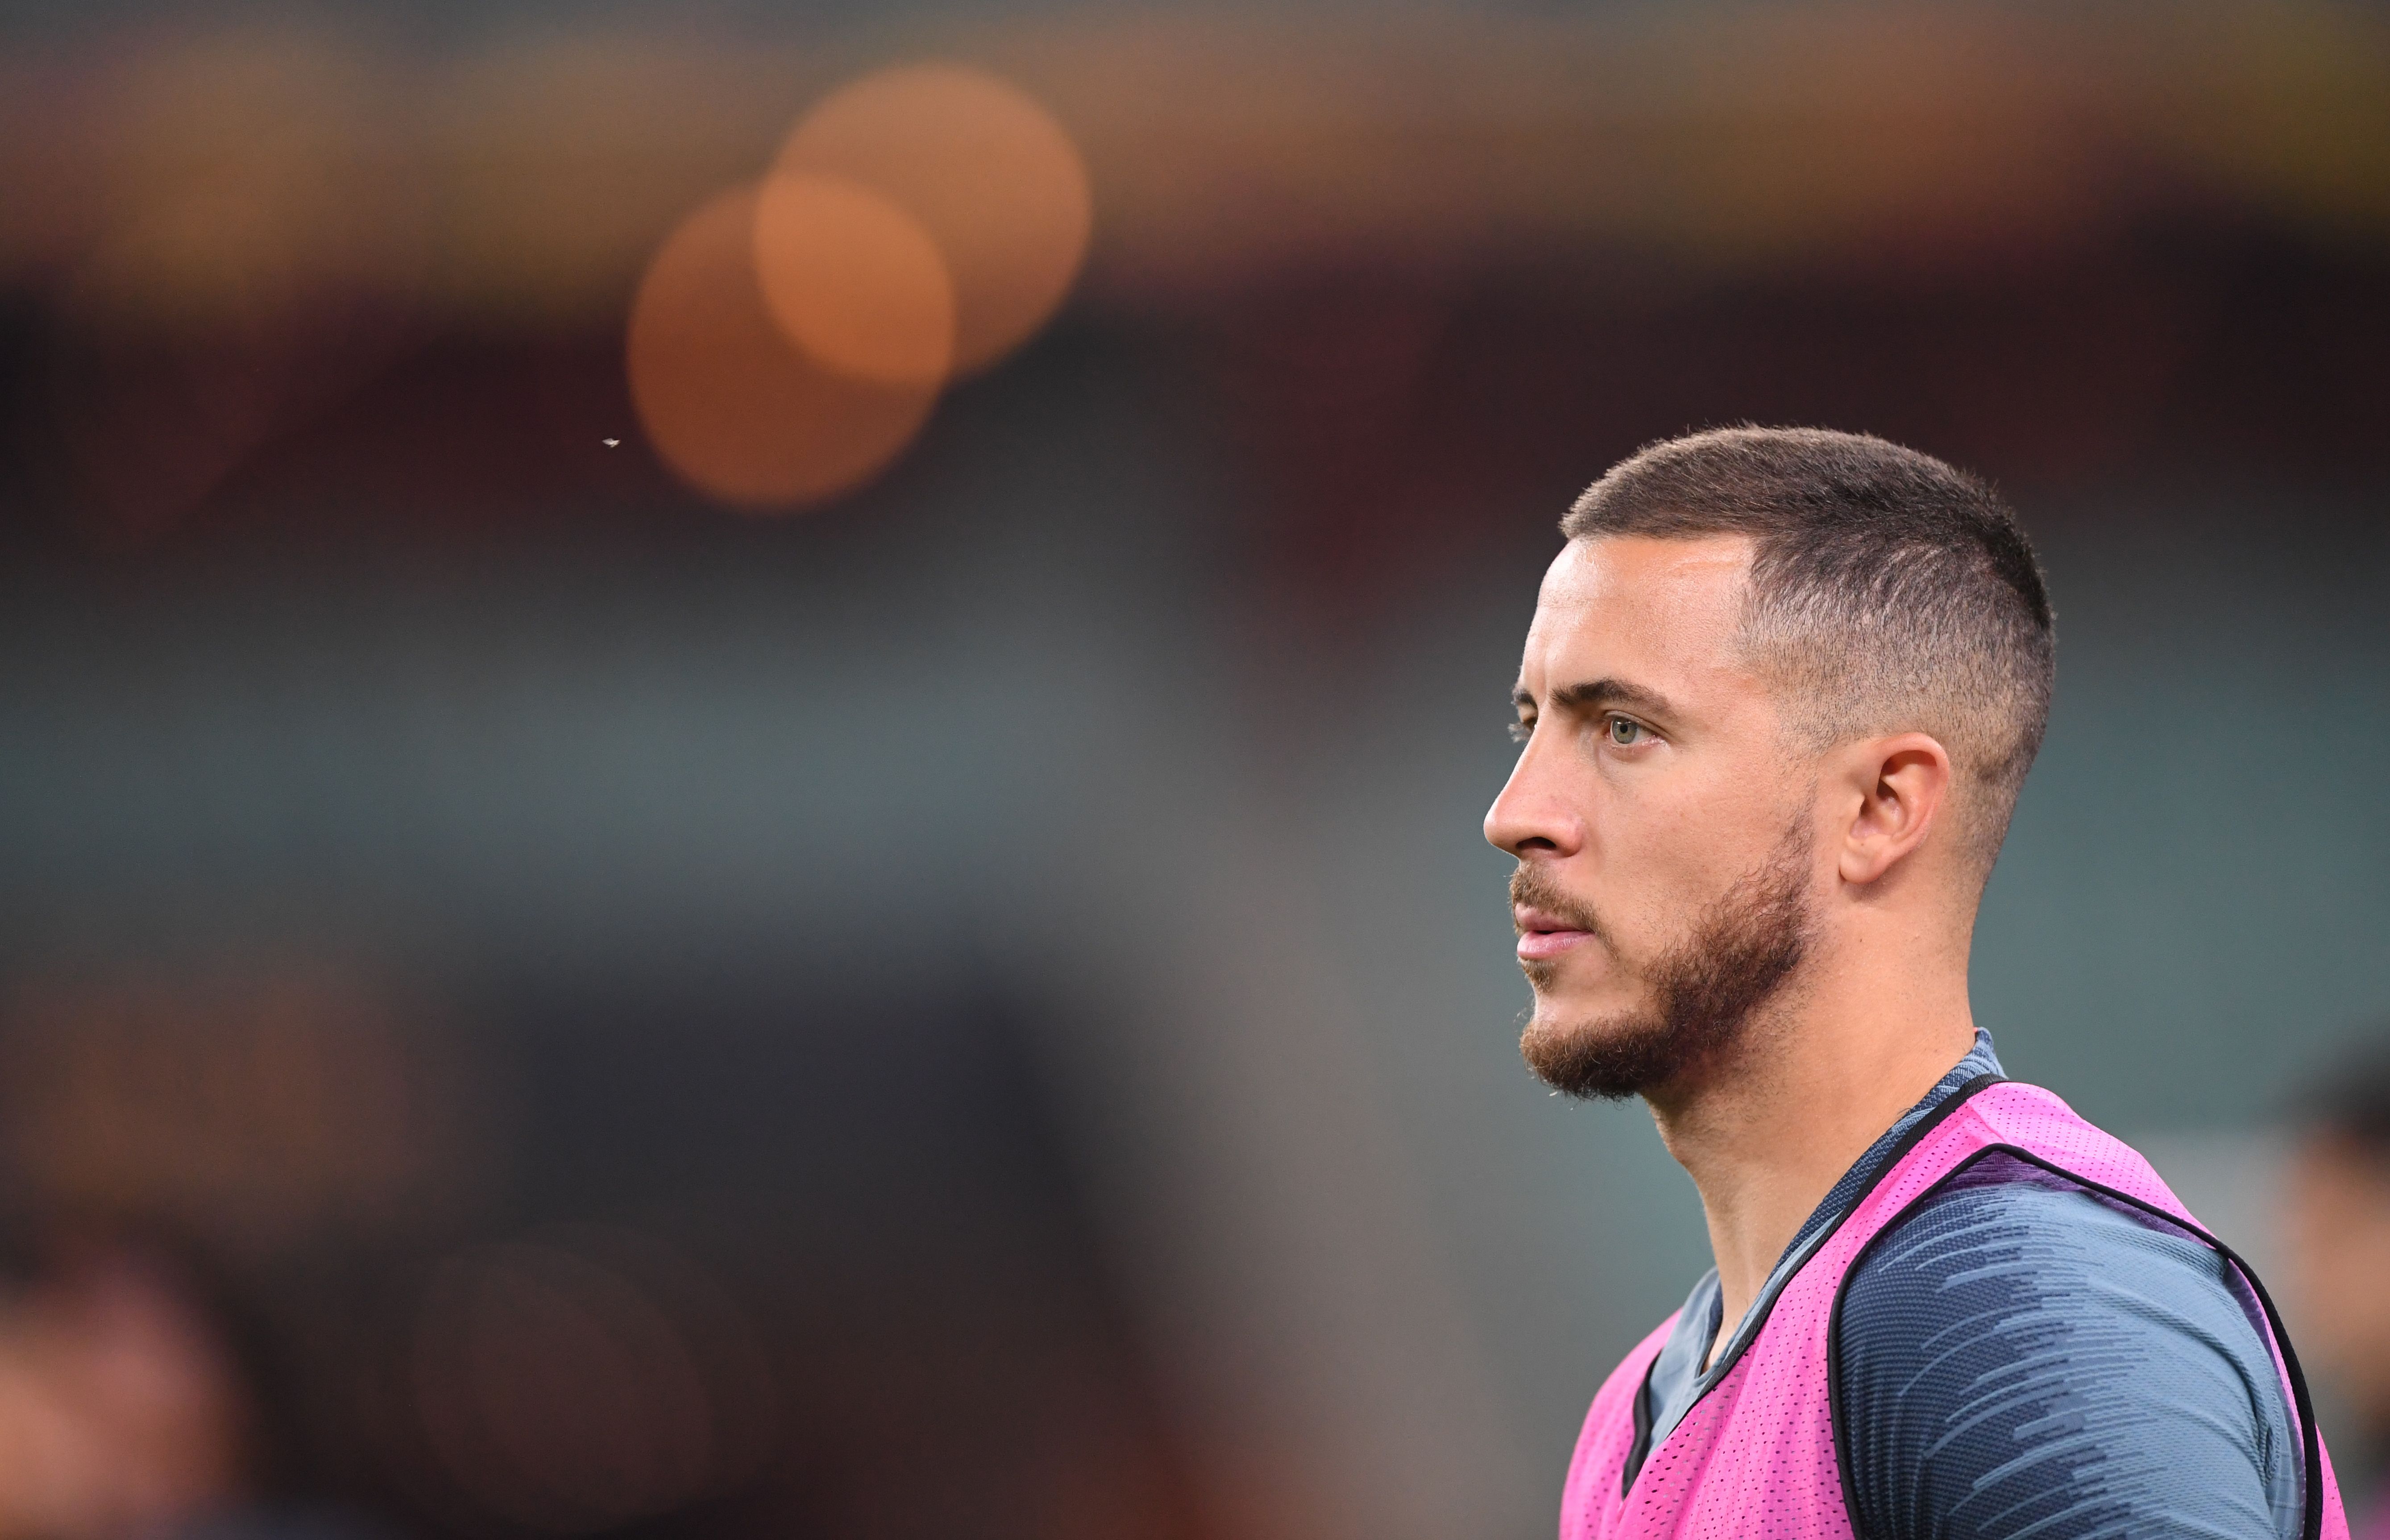 Chelsea's Belgian midfielder Eden Hazard is seen during a training session at the Baku Olympic Stadium in Baku on May 28, 2019 on the eve of the UEFA Europa League final football match between Chelsea and Arsenal. (Photo by Kirill KUDRYAVTSEV / AFP)        (Photo credit should read KIRILL KUDRYAVTSEV/AFP/Getty Images)